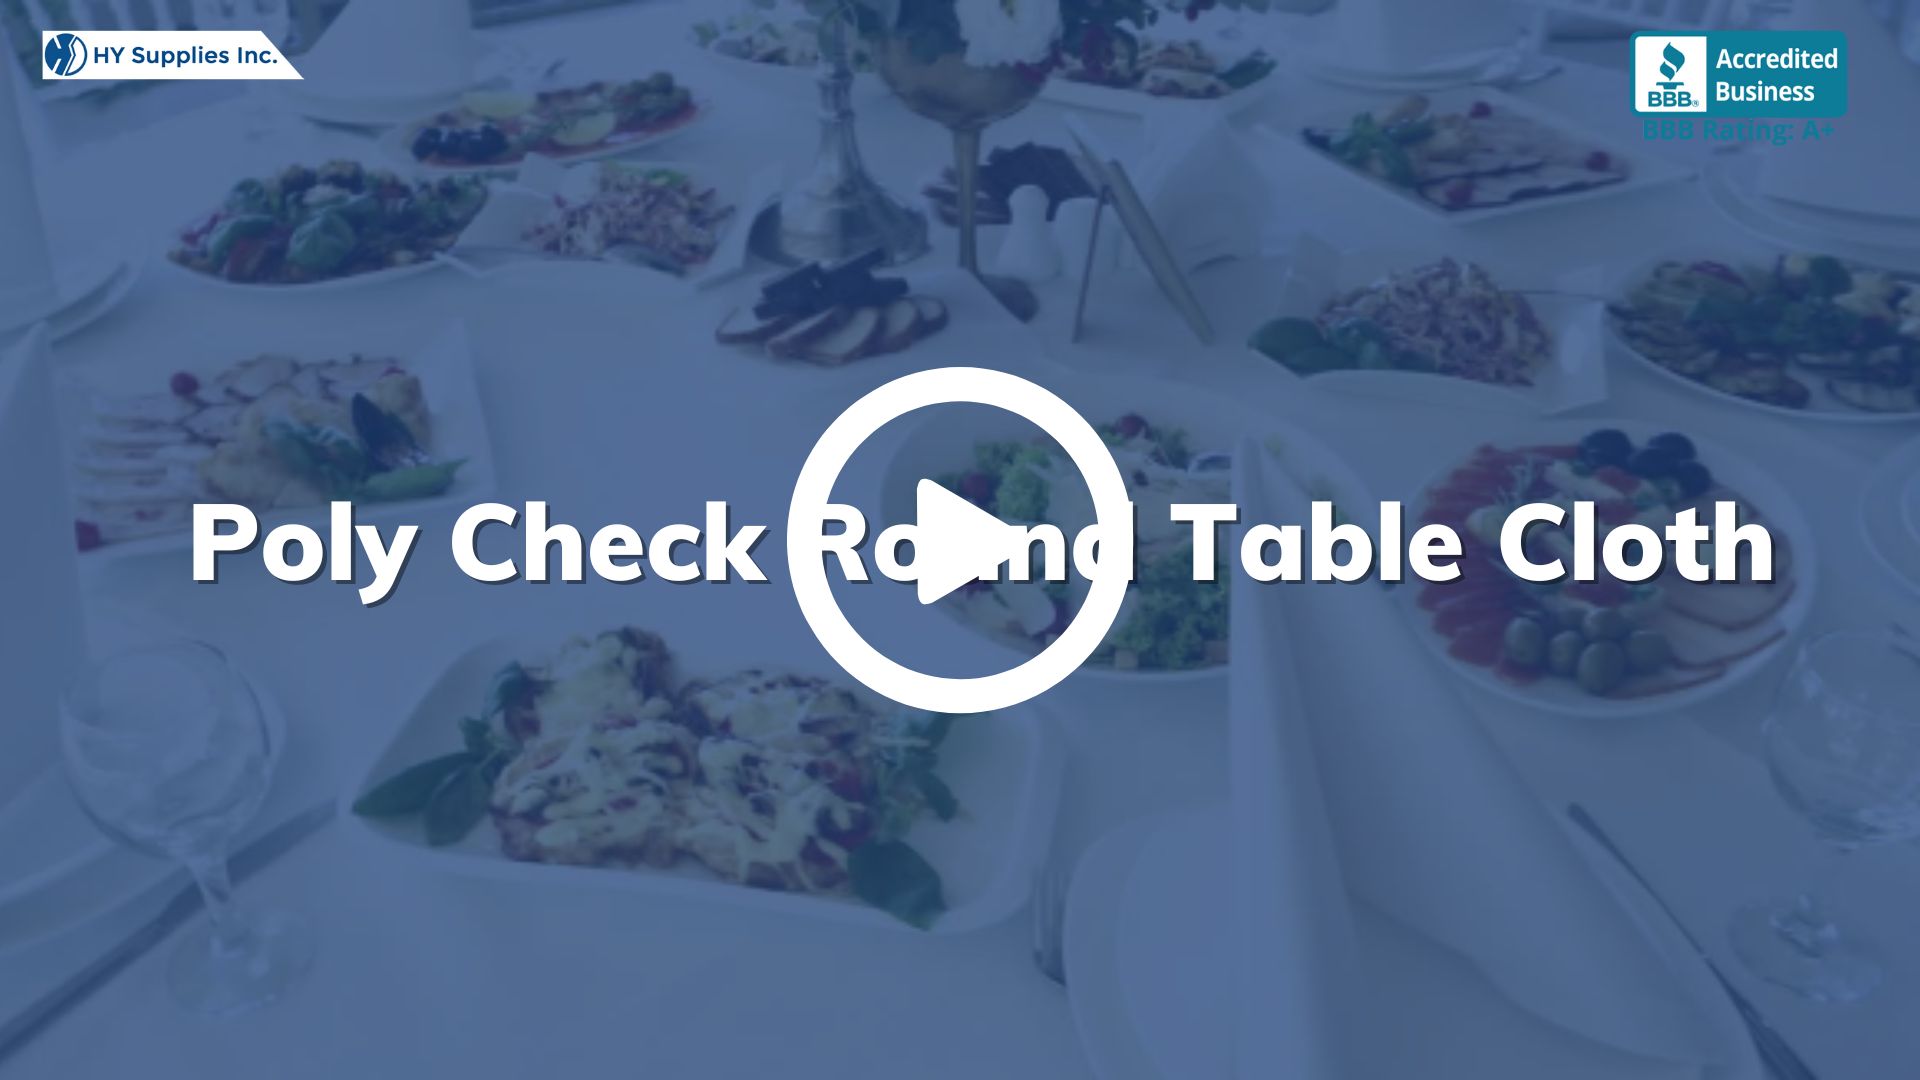 Poly Check Round Table Cloth